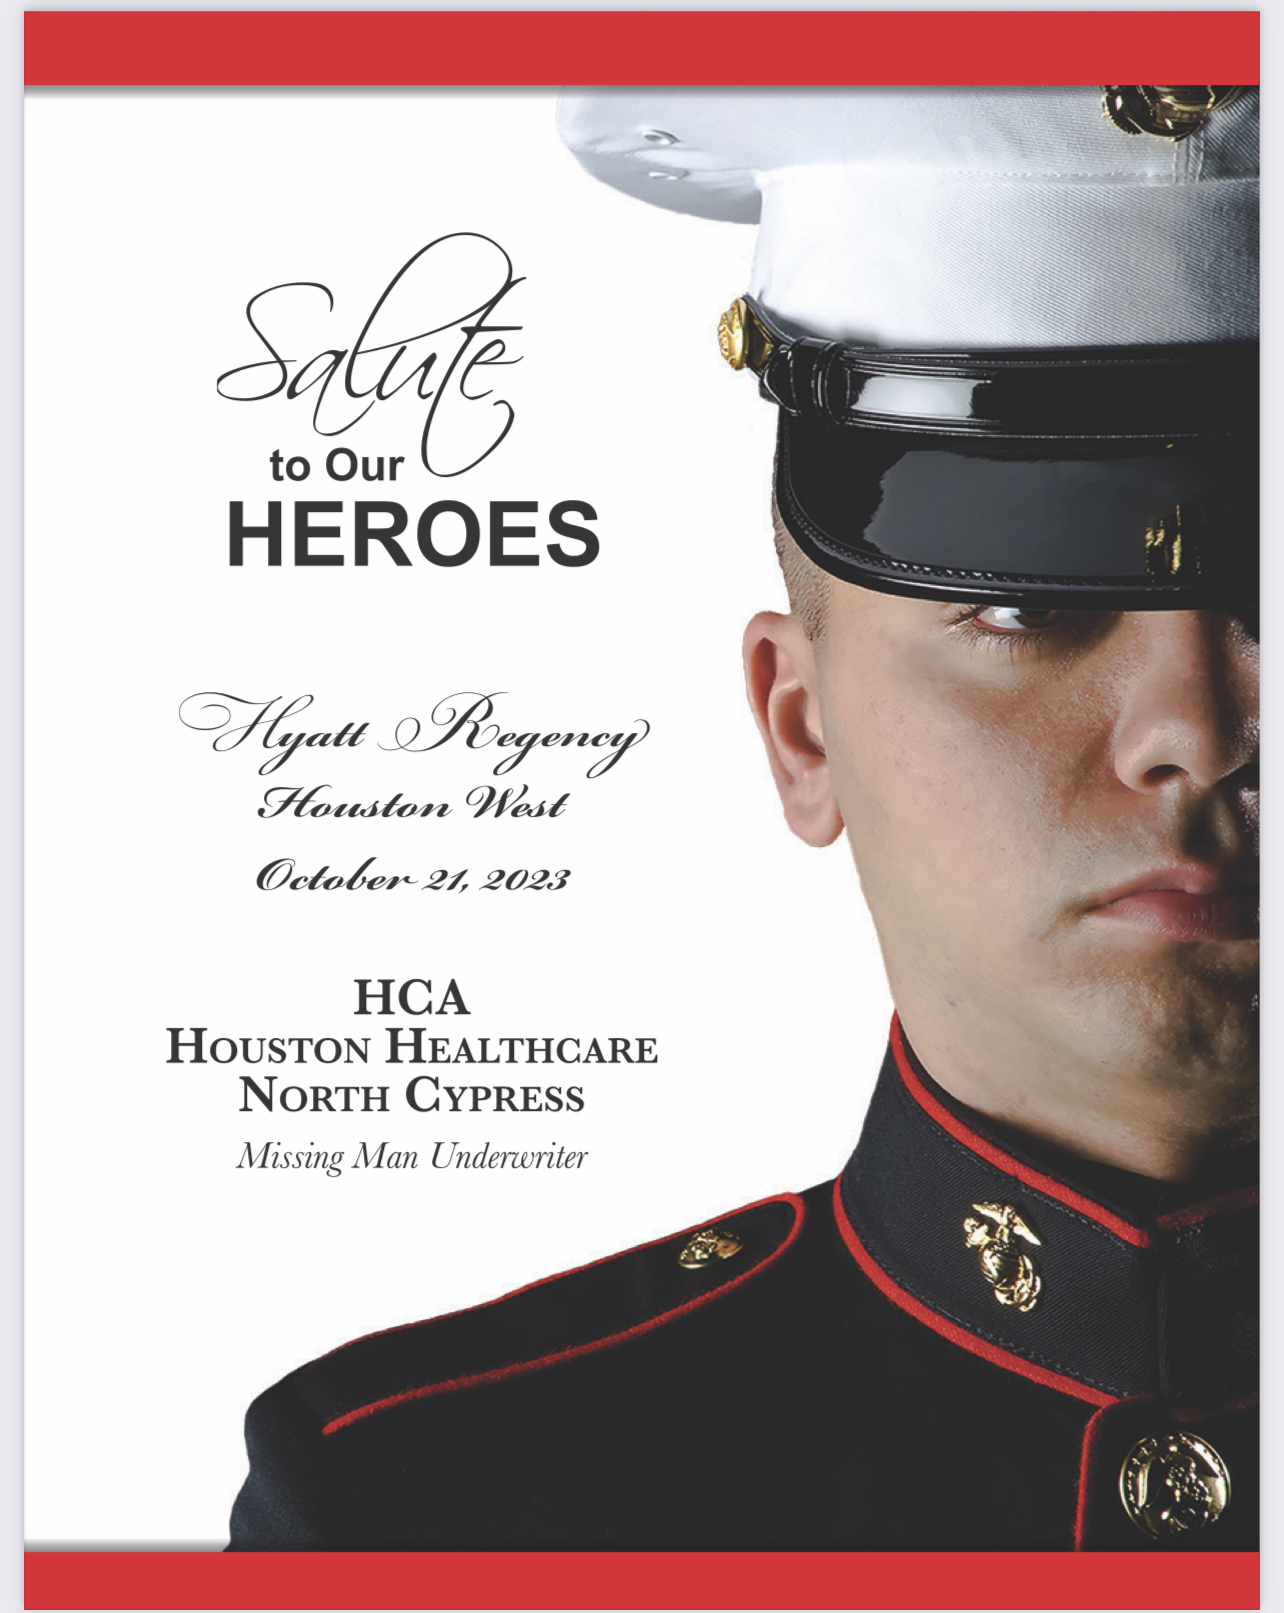 Salute to Our Heroes event